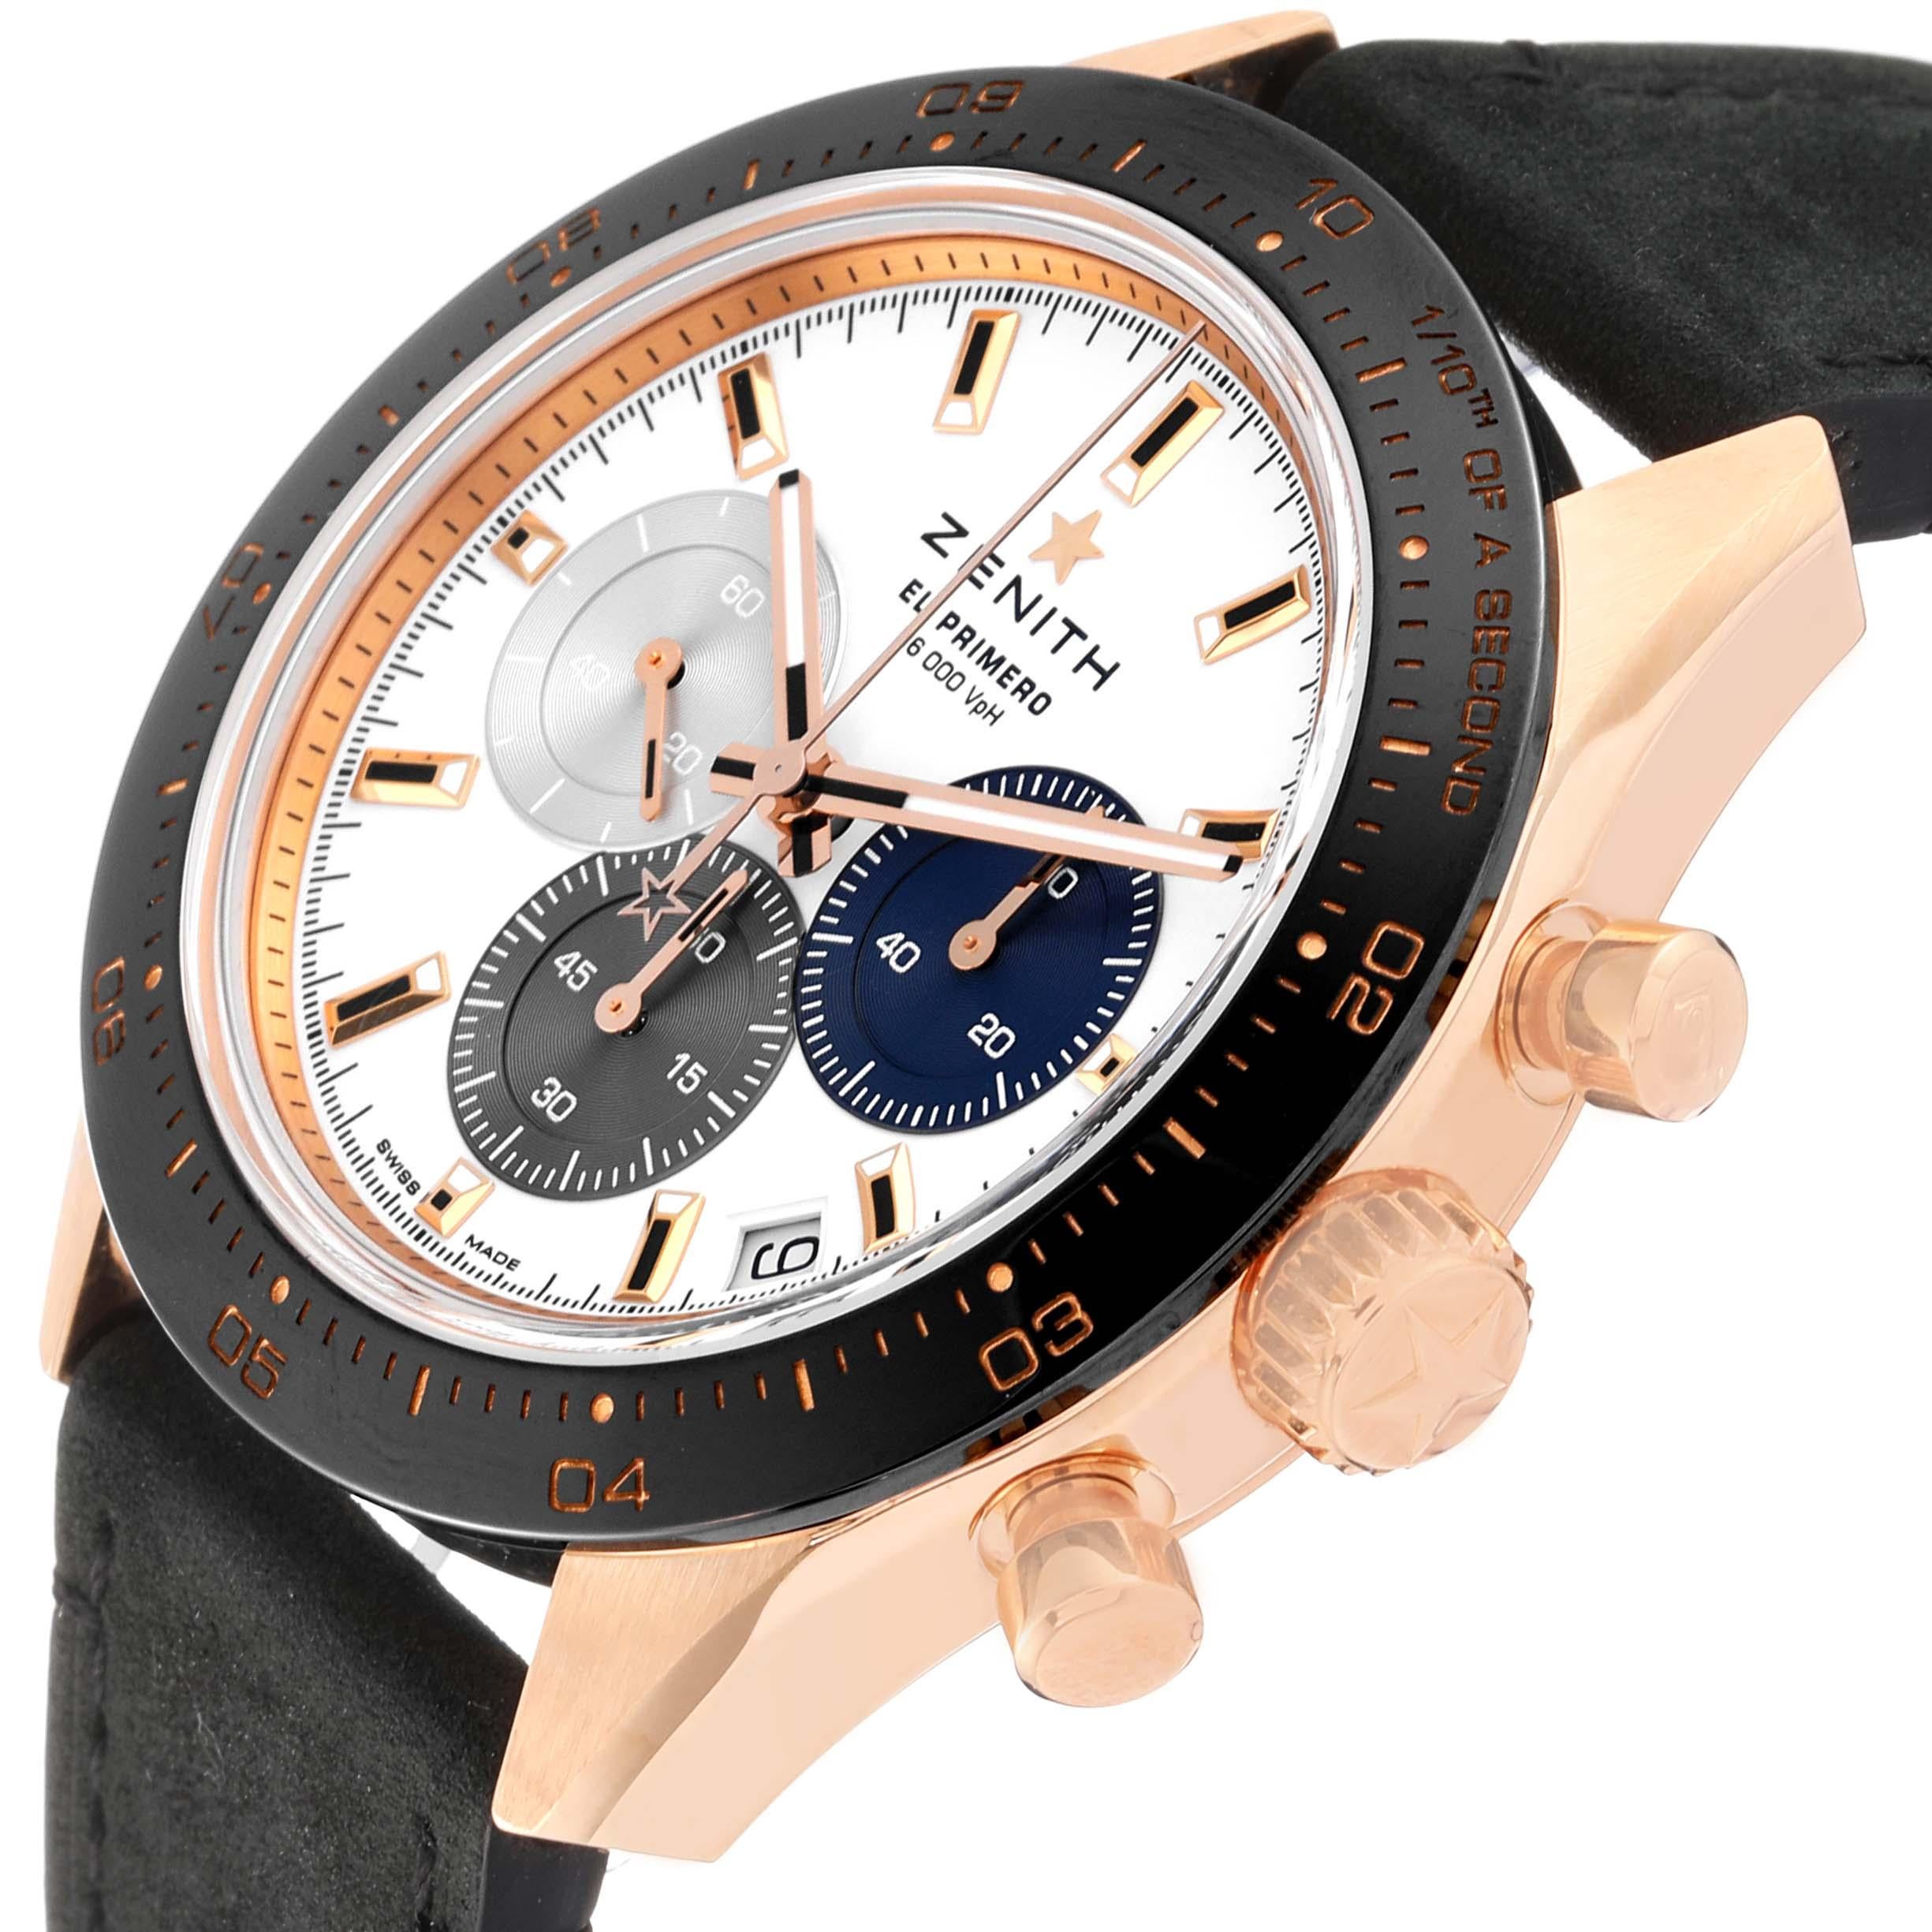 Zenith Chronomaster Sport Rose Gold Mens Watch 18.3100.3600 Box Card. In-house Zenith El Primero self-winding automatic 1/10th of a second chronograph movement. 18k rose gold case 41.0 mm in diameter. Chronograph pushers at 2 and 4 o'clock. Crown